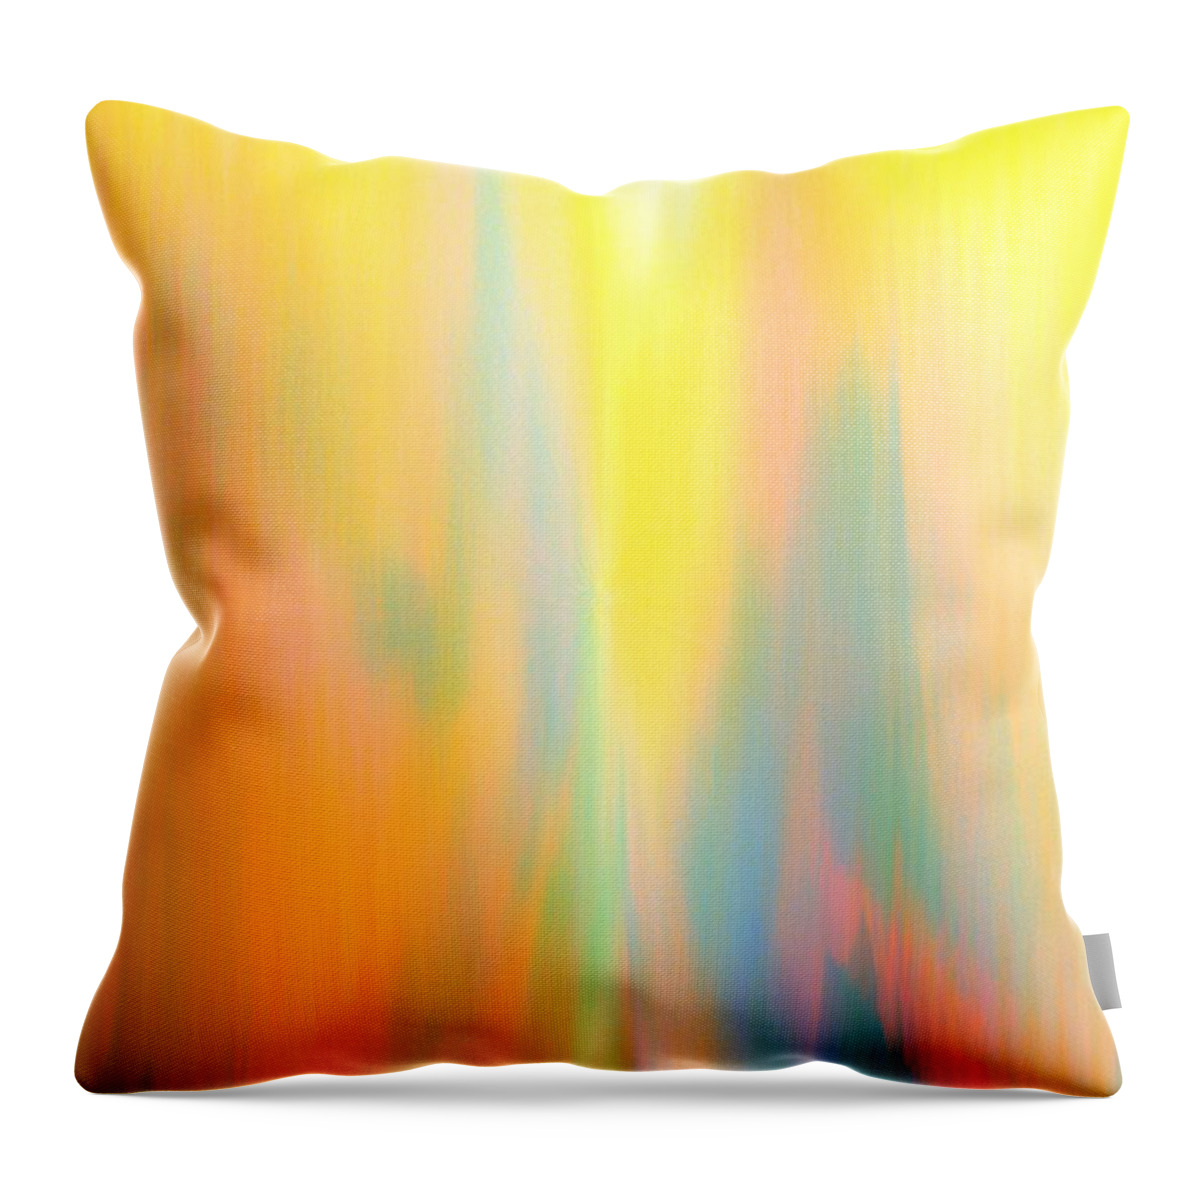 Yellow Throw Pillow featuring the digital art Yellow Abstract Landscape by Itsonlythemoon